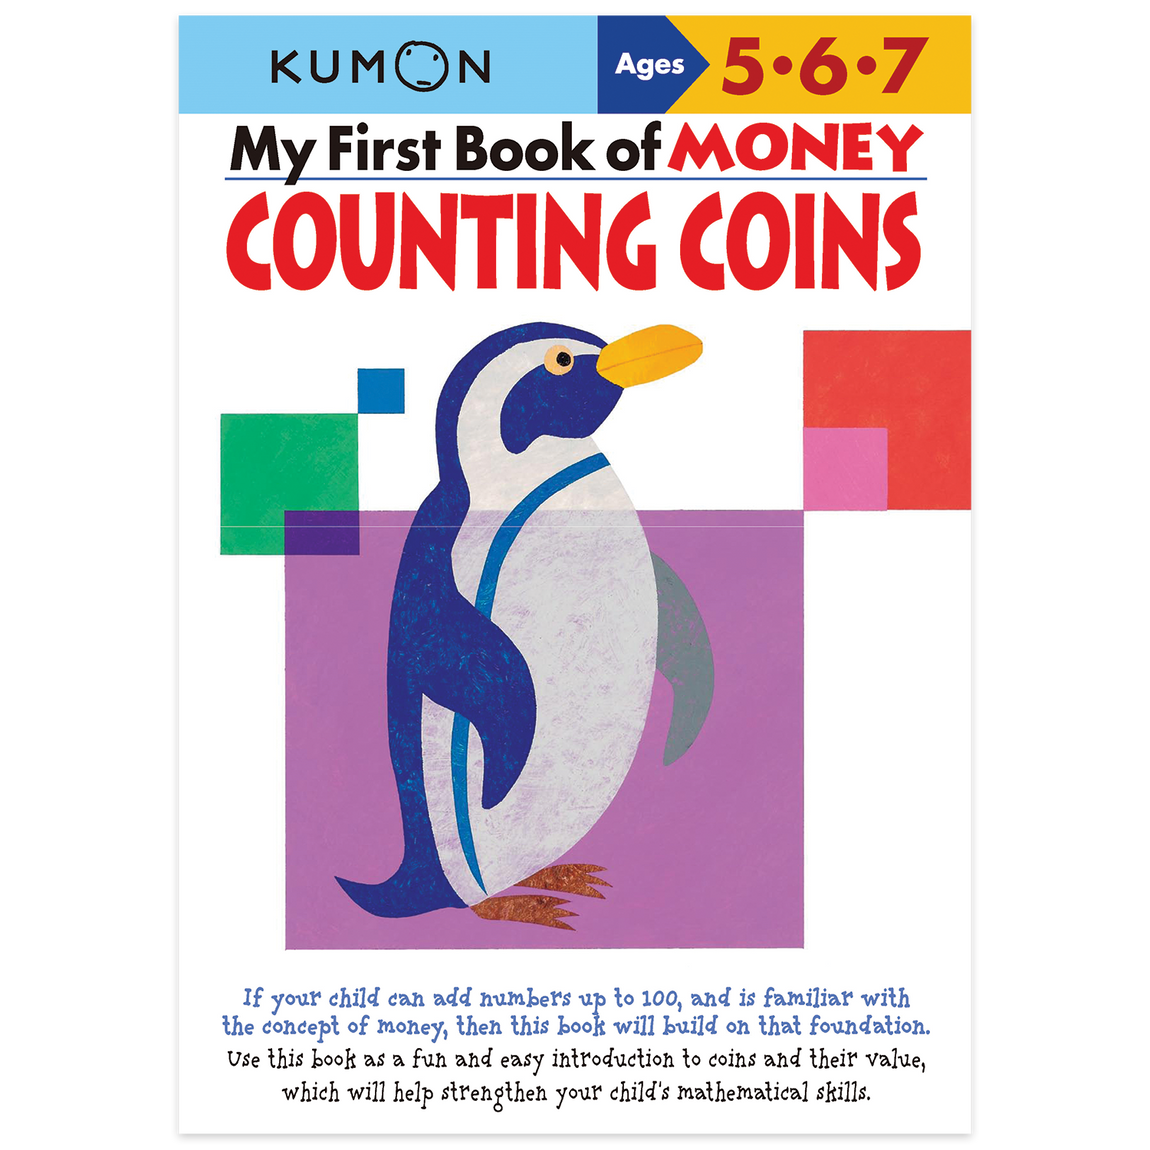 my first book of money: counting coins